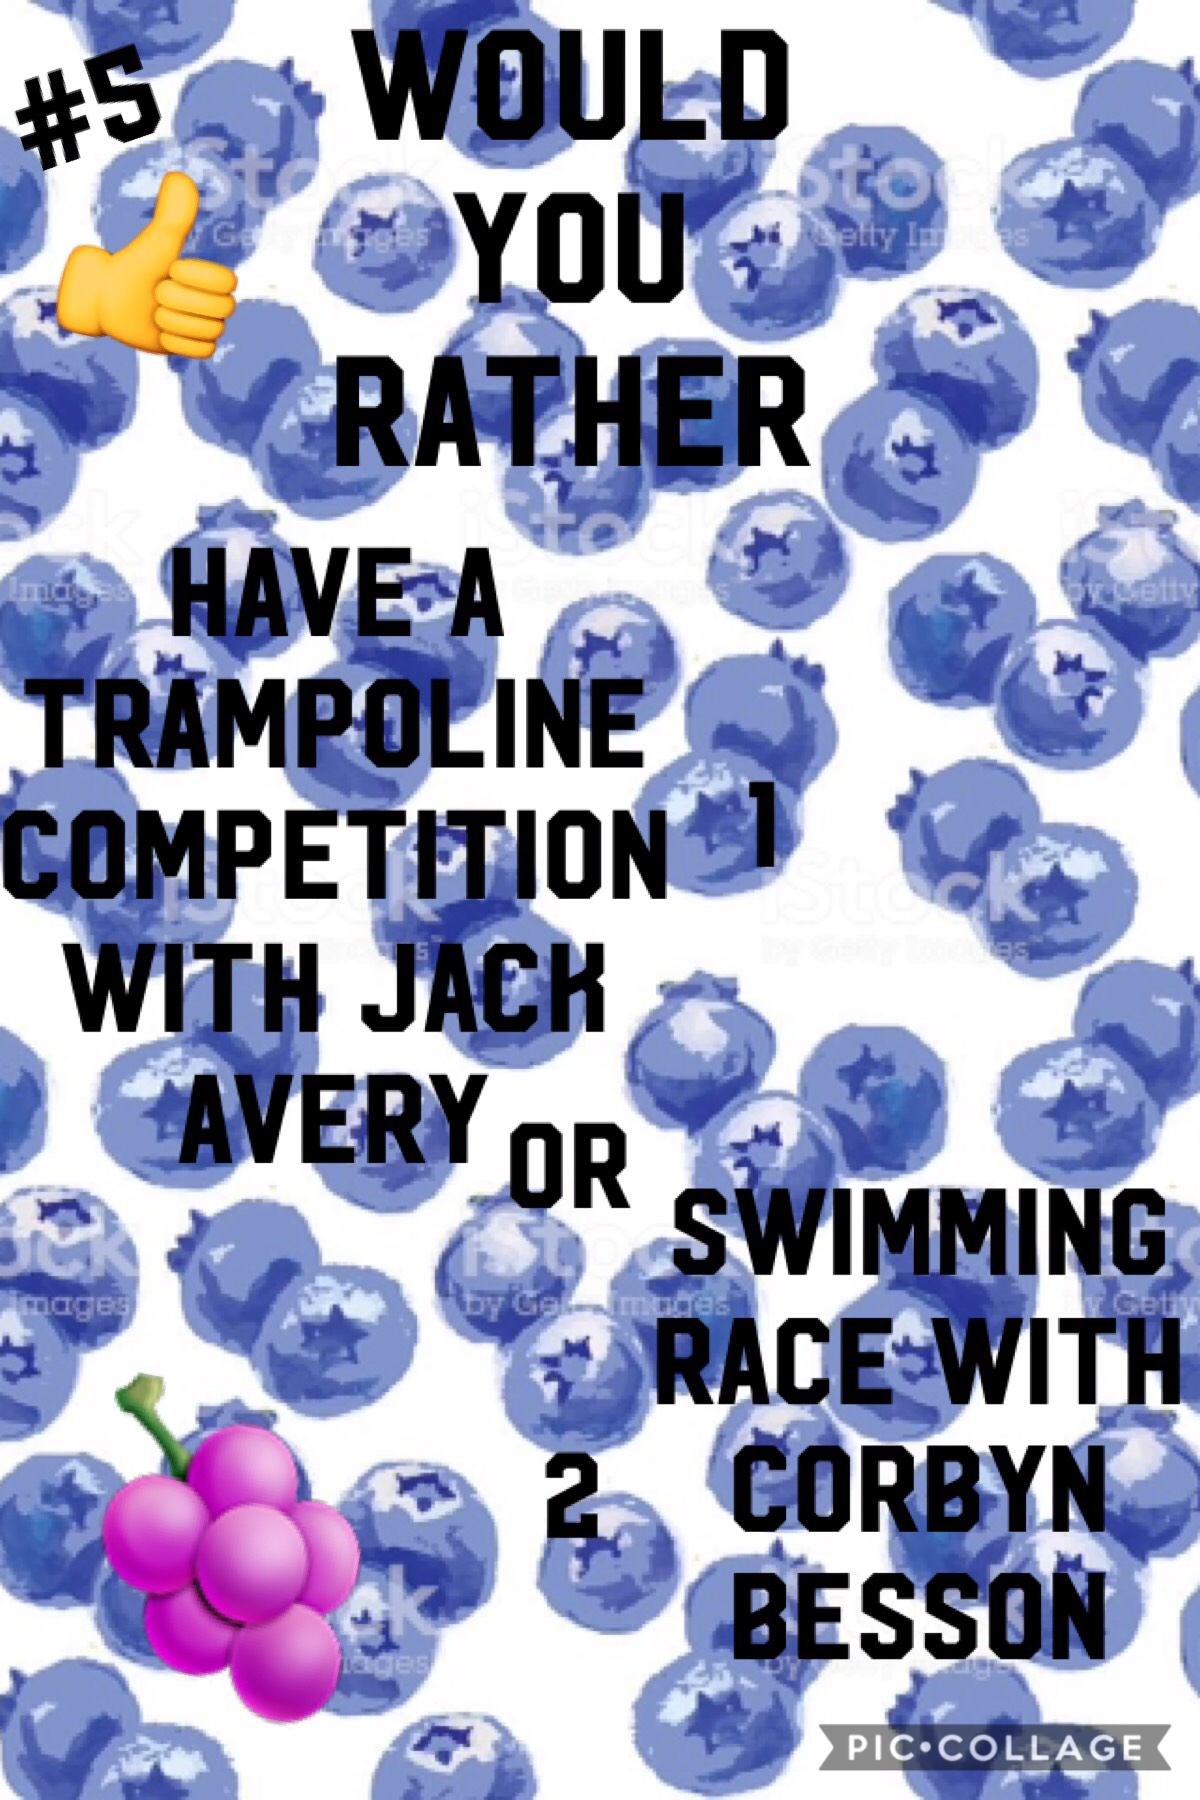 🍇Tap🍇

This is probably a silly question but it was the first thing that came to my head.
If I had to pick one, I would pick 1 😀